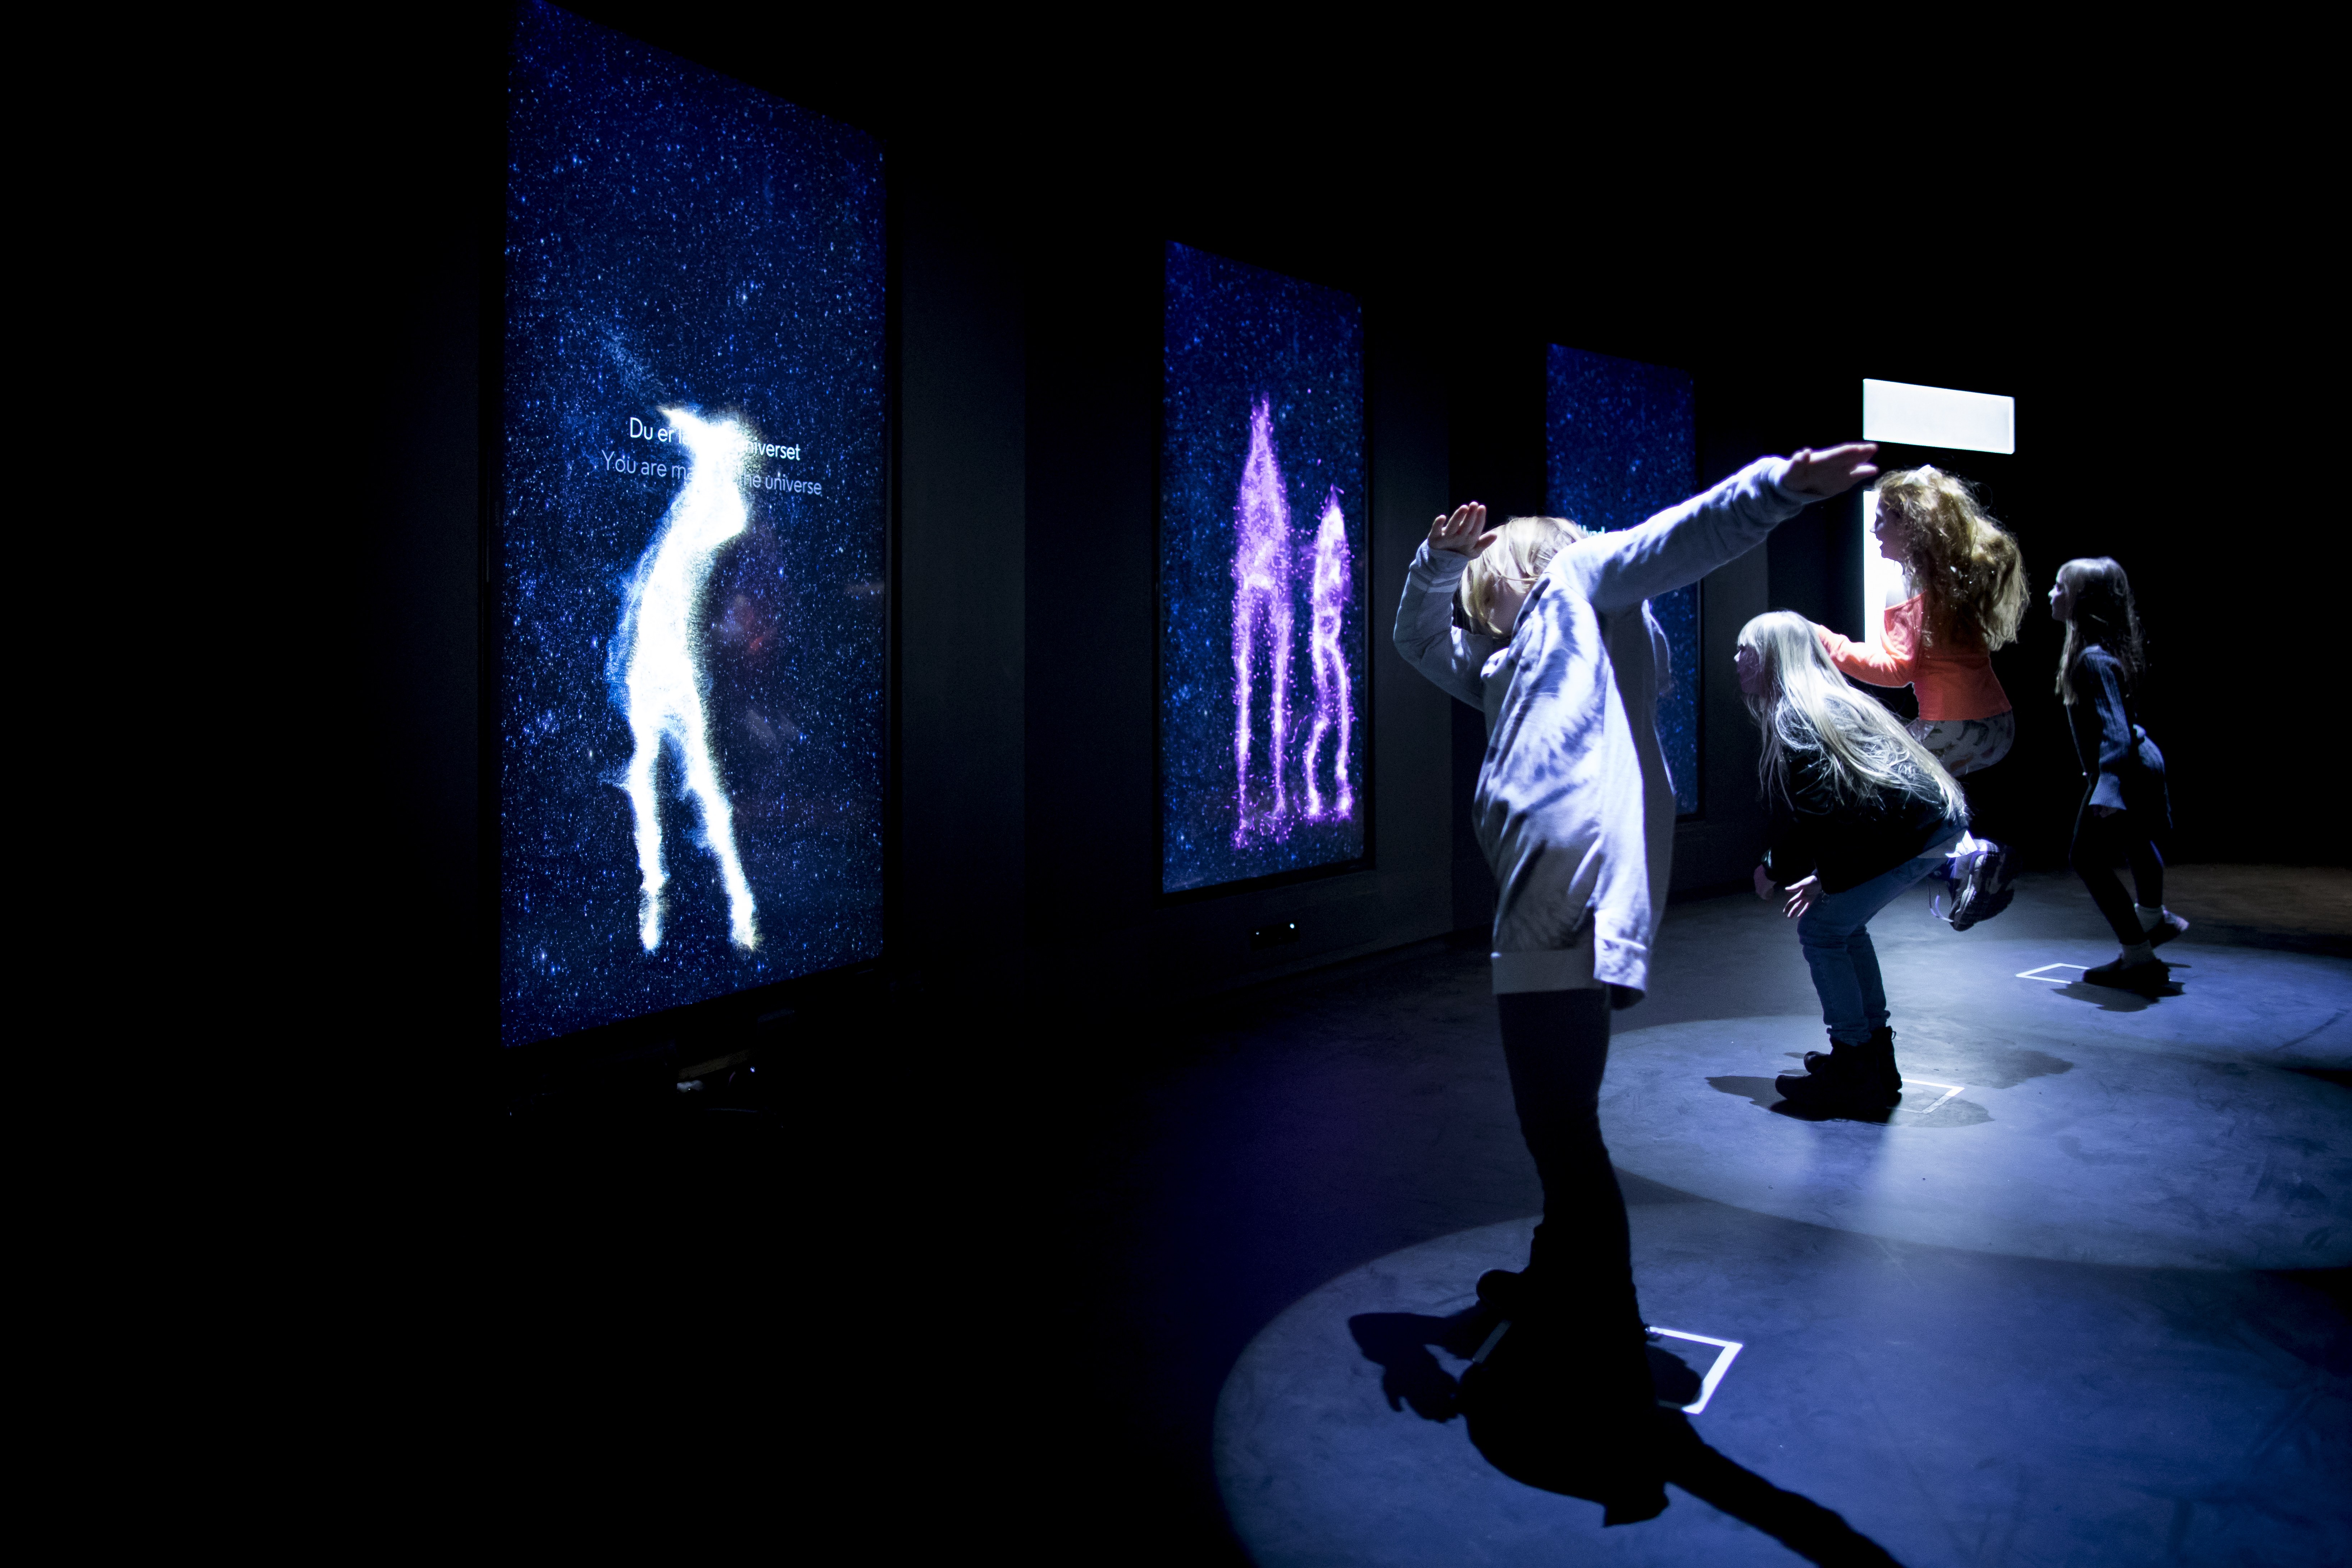 "Made in Space" - a new inclusive exhibition about astrophysics